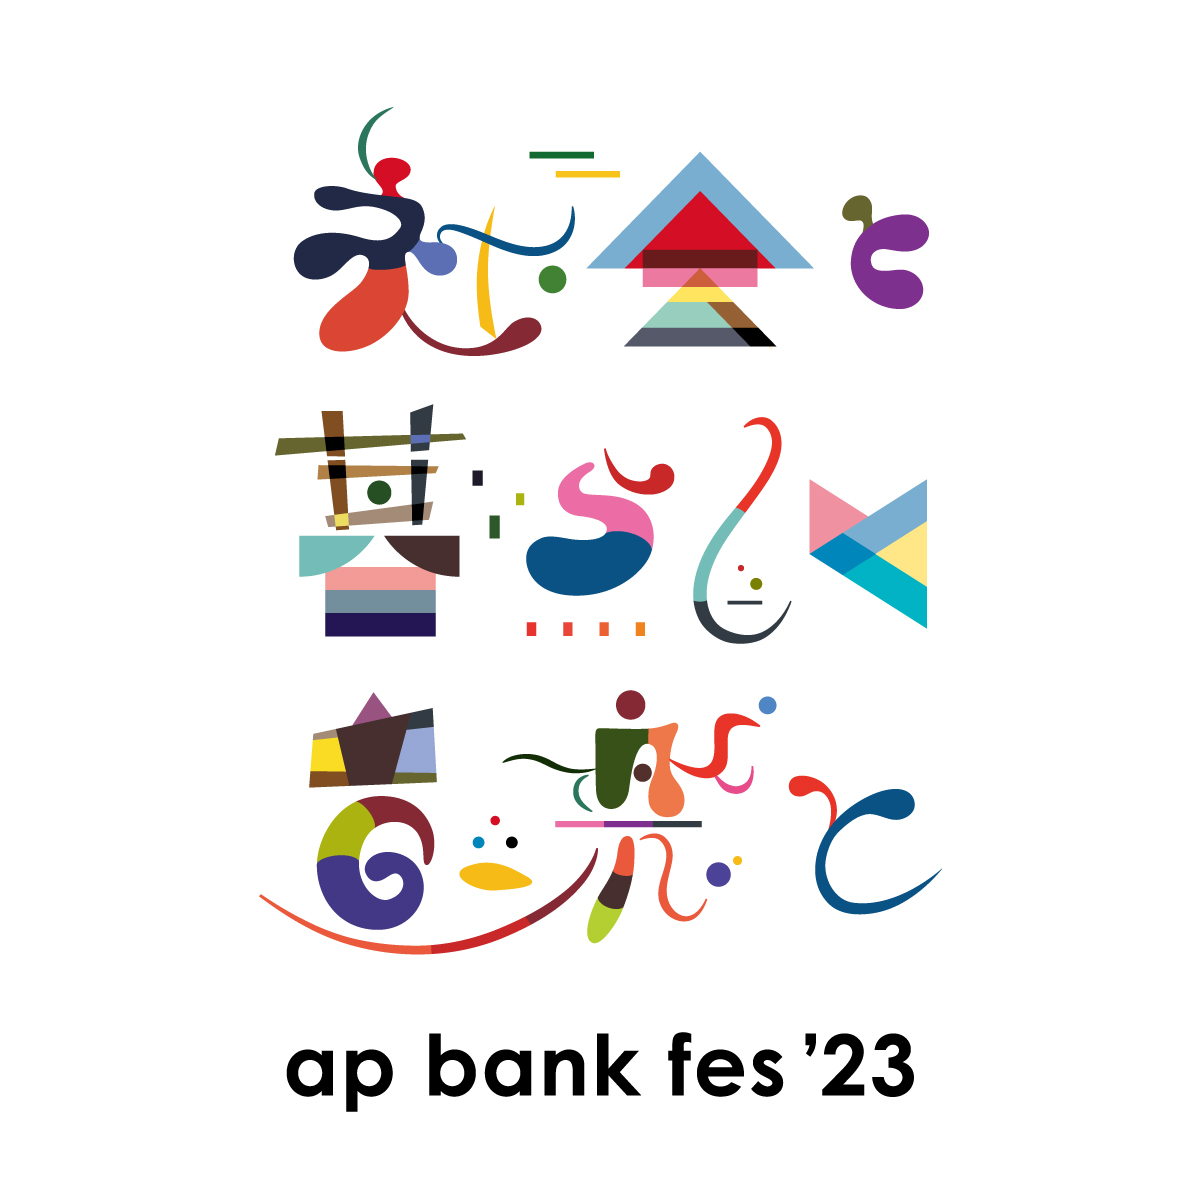 『ap bank fes ’23』に、back number、Mr.Children、アイナ・ジ・エンド、小田和正、長屋晴子（緑黄色社会）、真心ブラザーズの出演が決定 - 画像一覧（1/3）